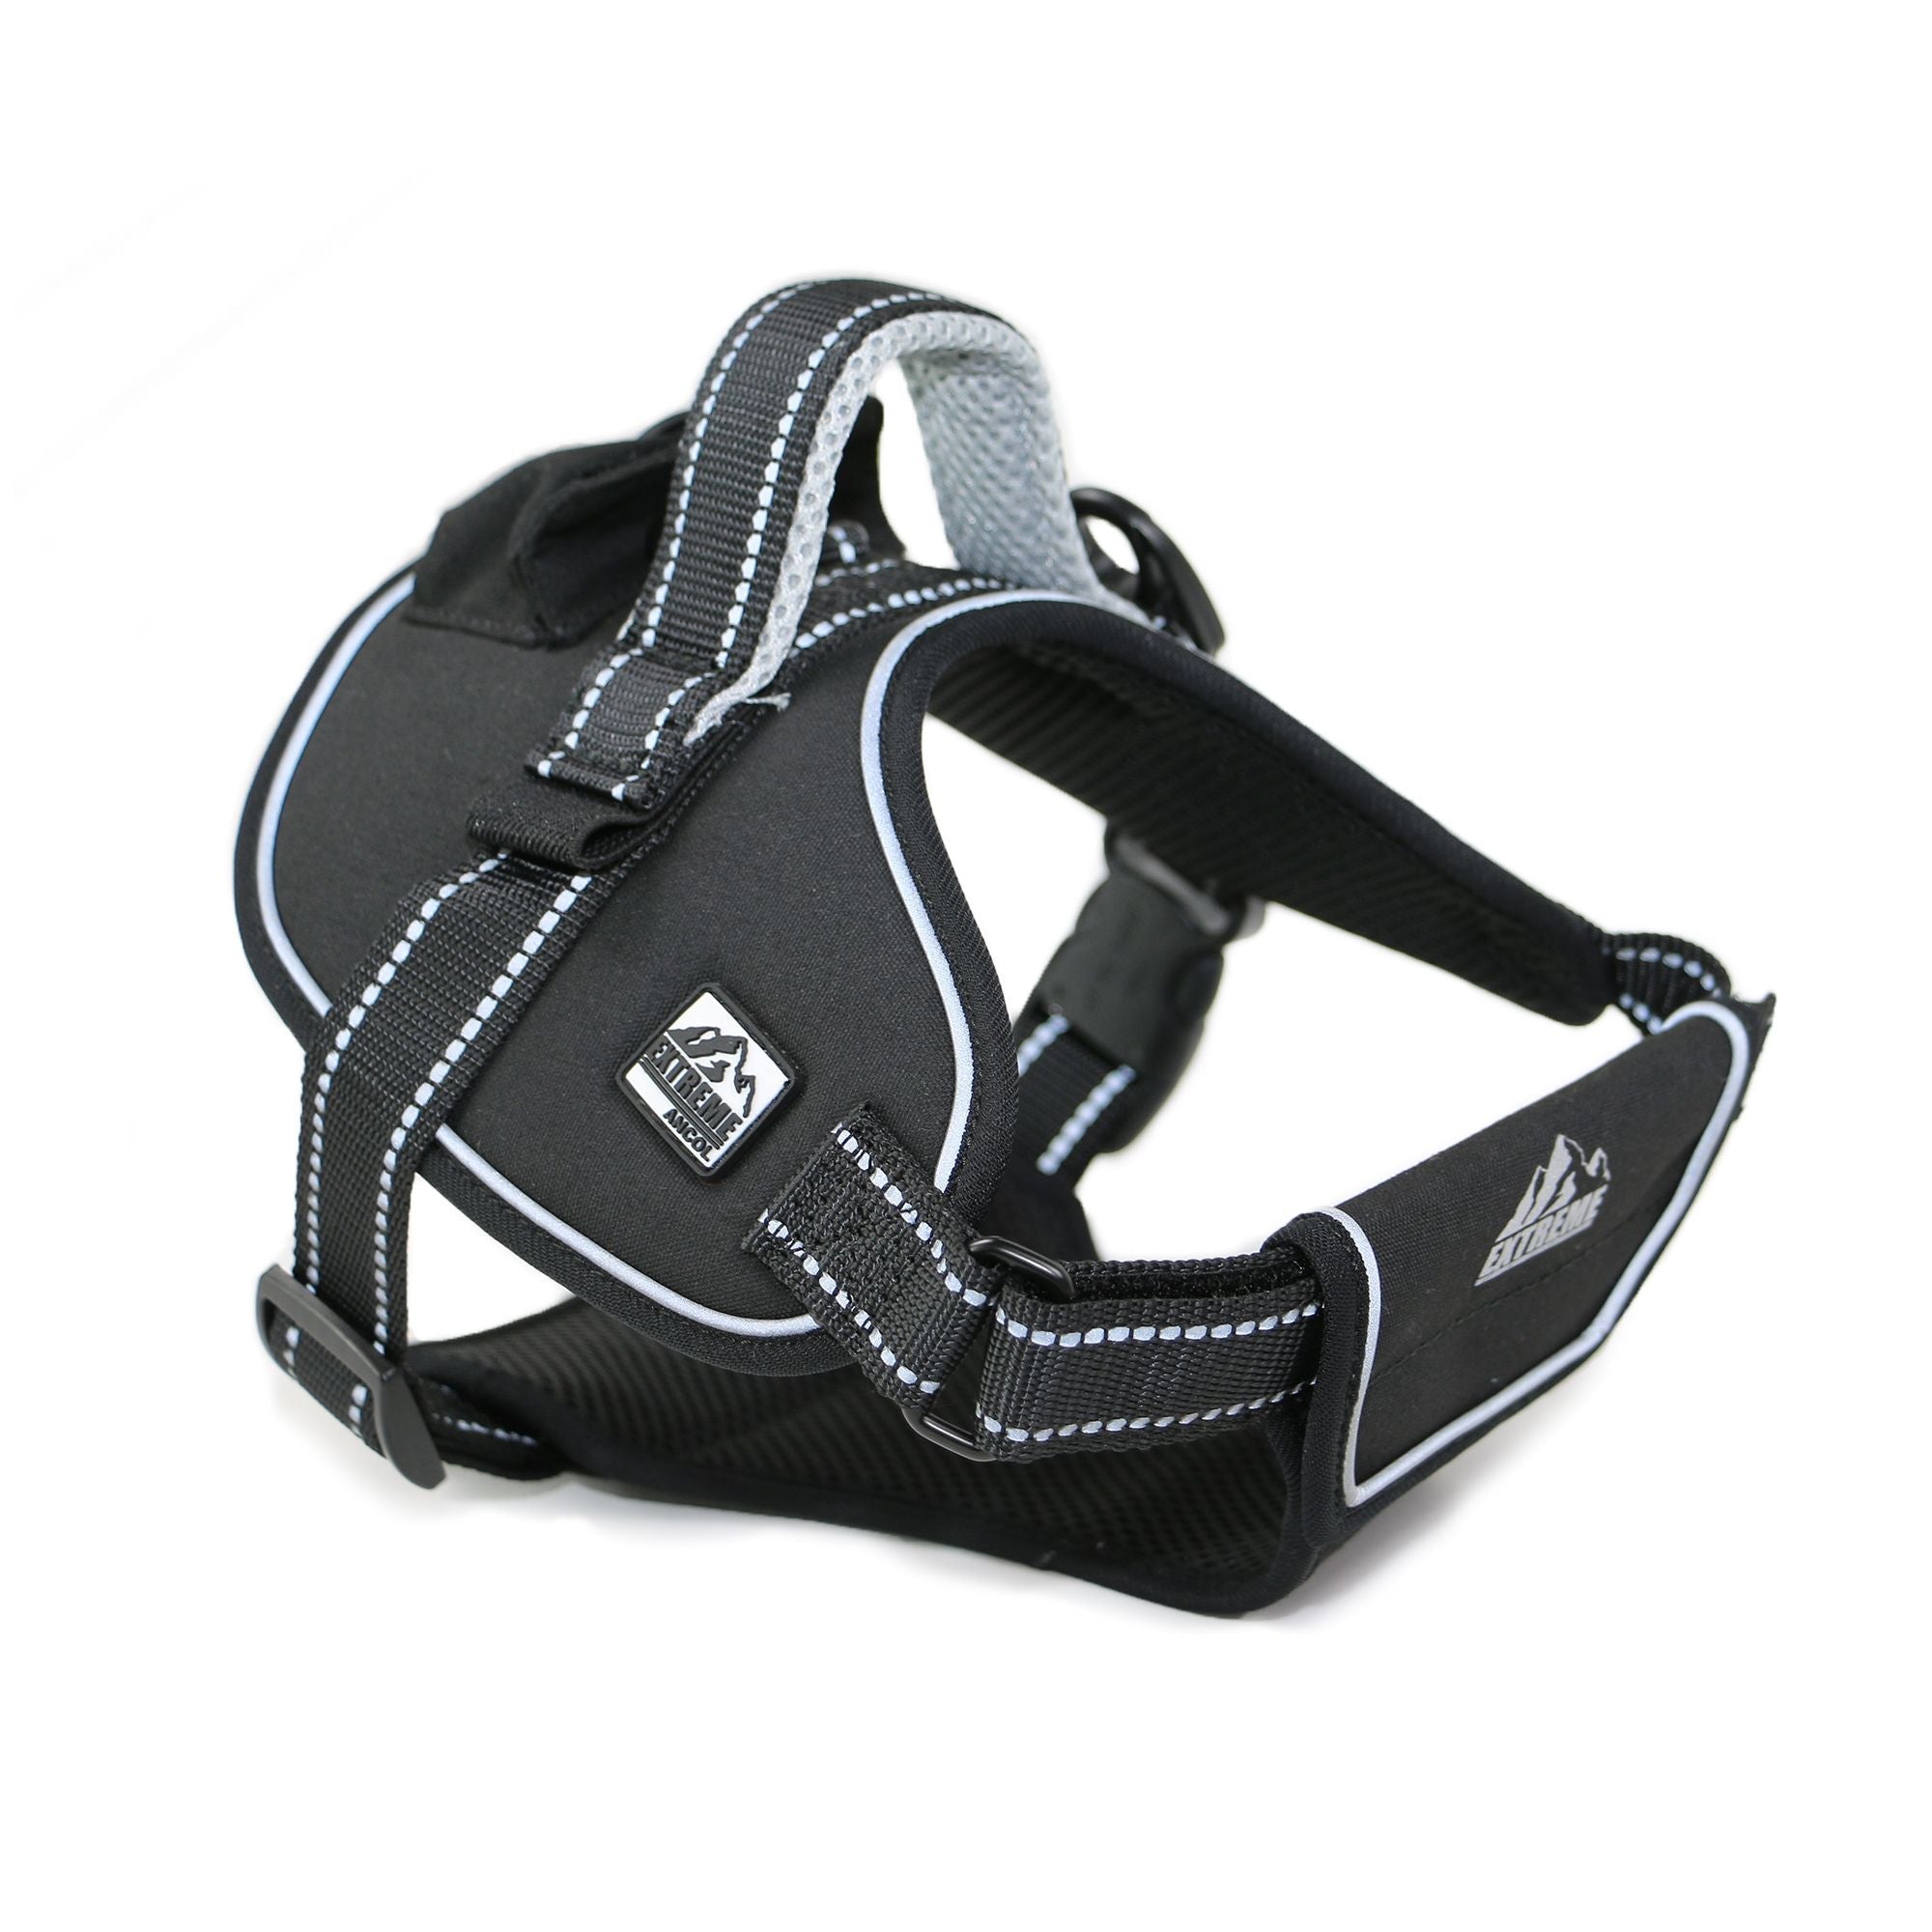 Ancol Extreme Harness, Ancol, S 51-67cm